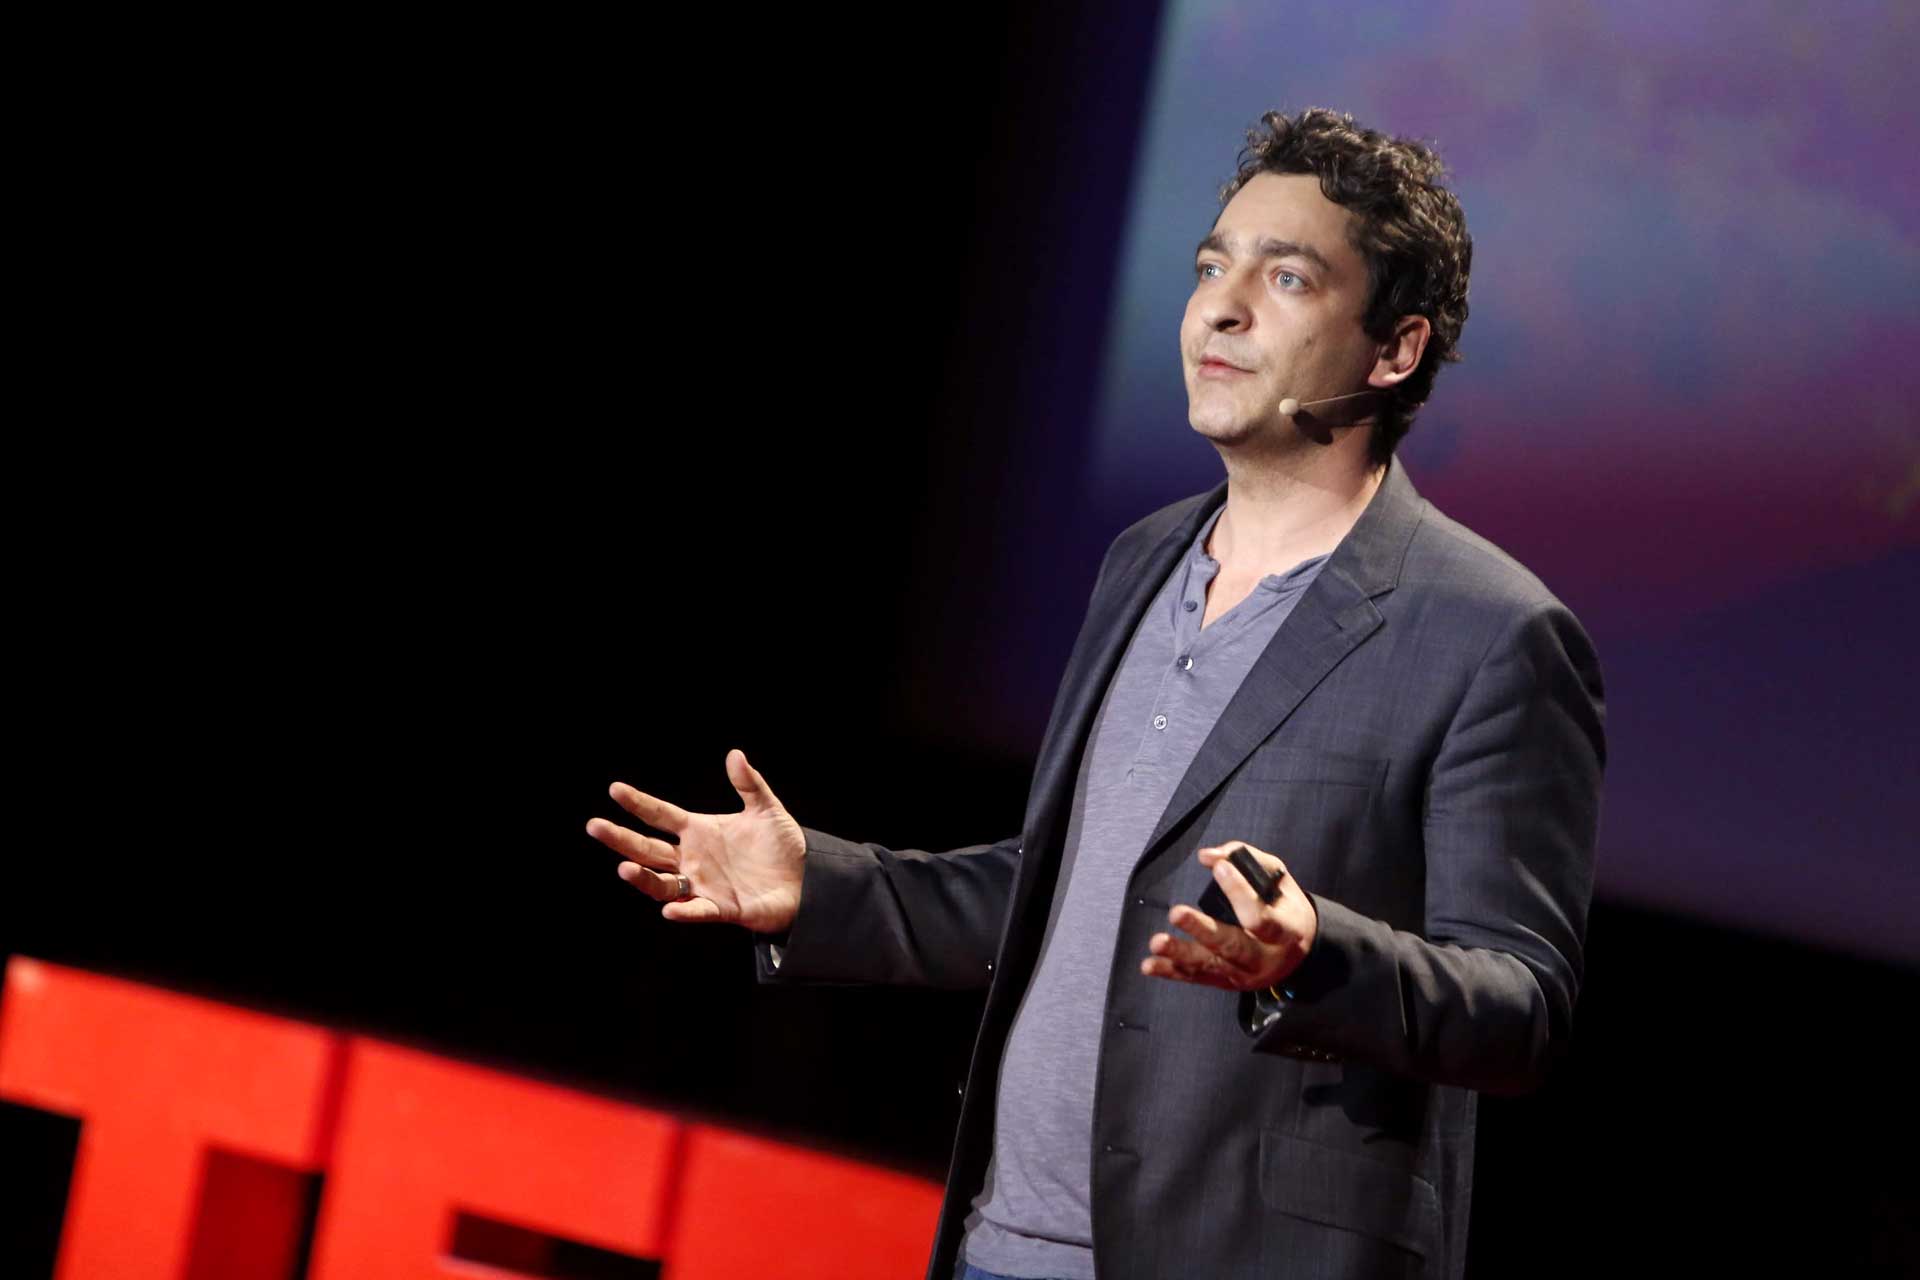 conference-TEDxParis-2013-18.jpg